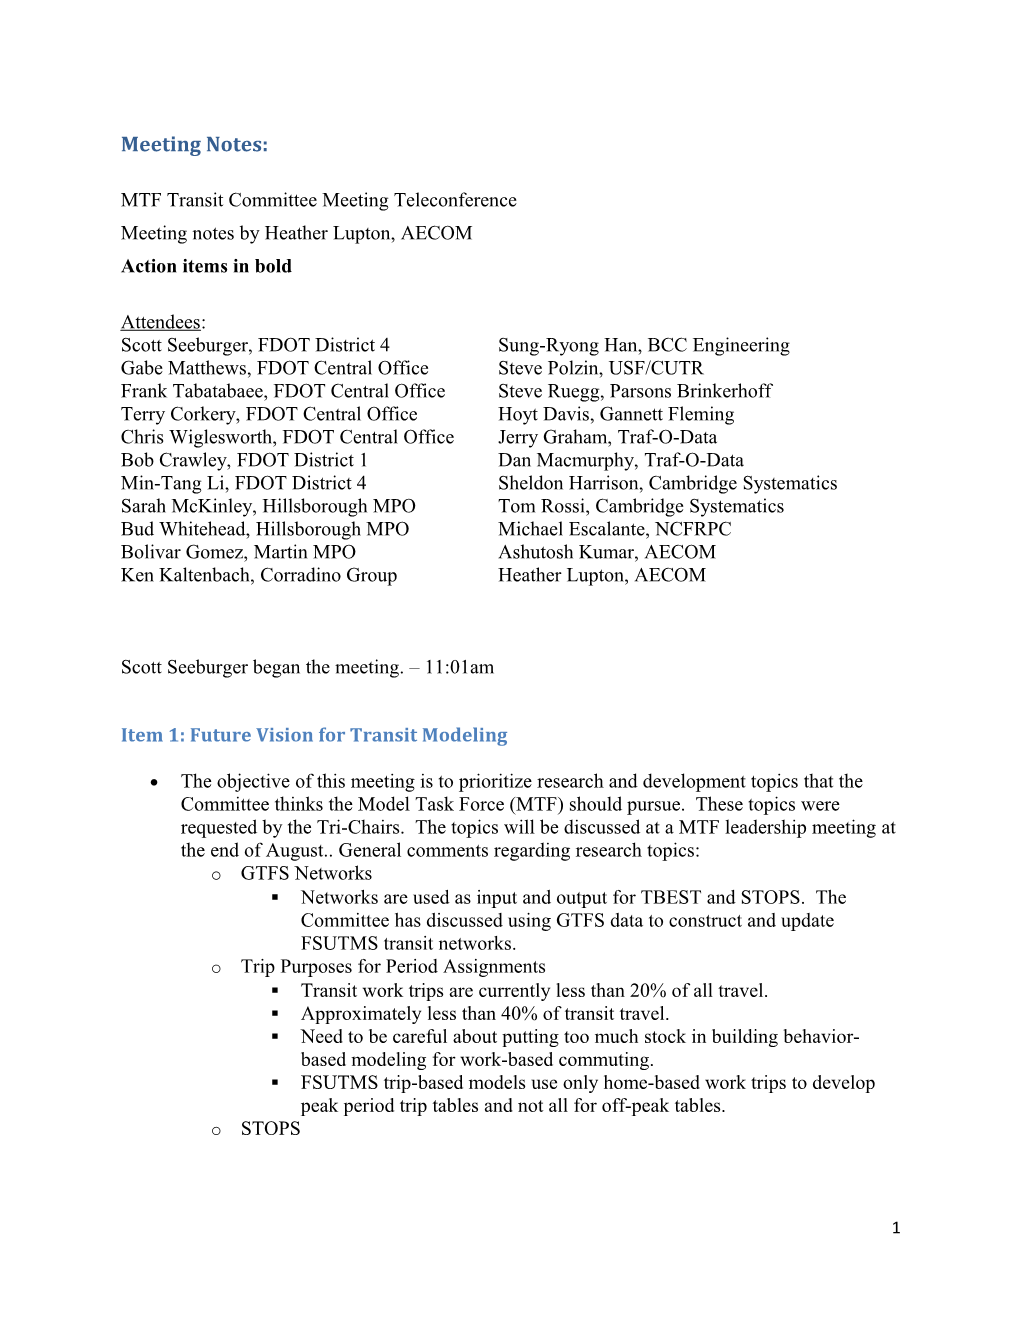 MTF Transit Committee Meeting July 14, 2015 11:00 AM-12:00 AM